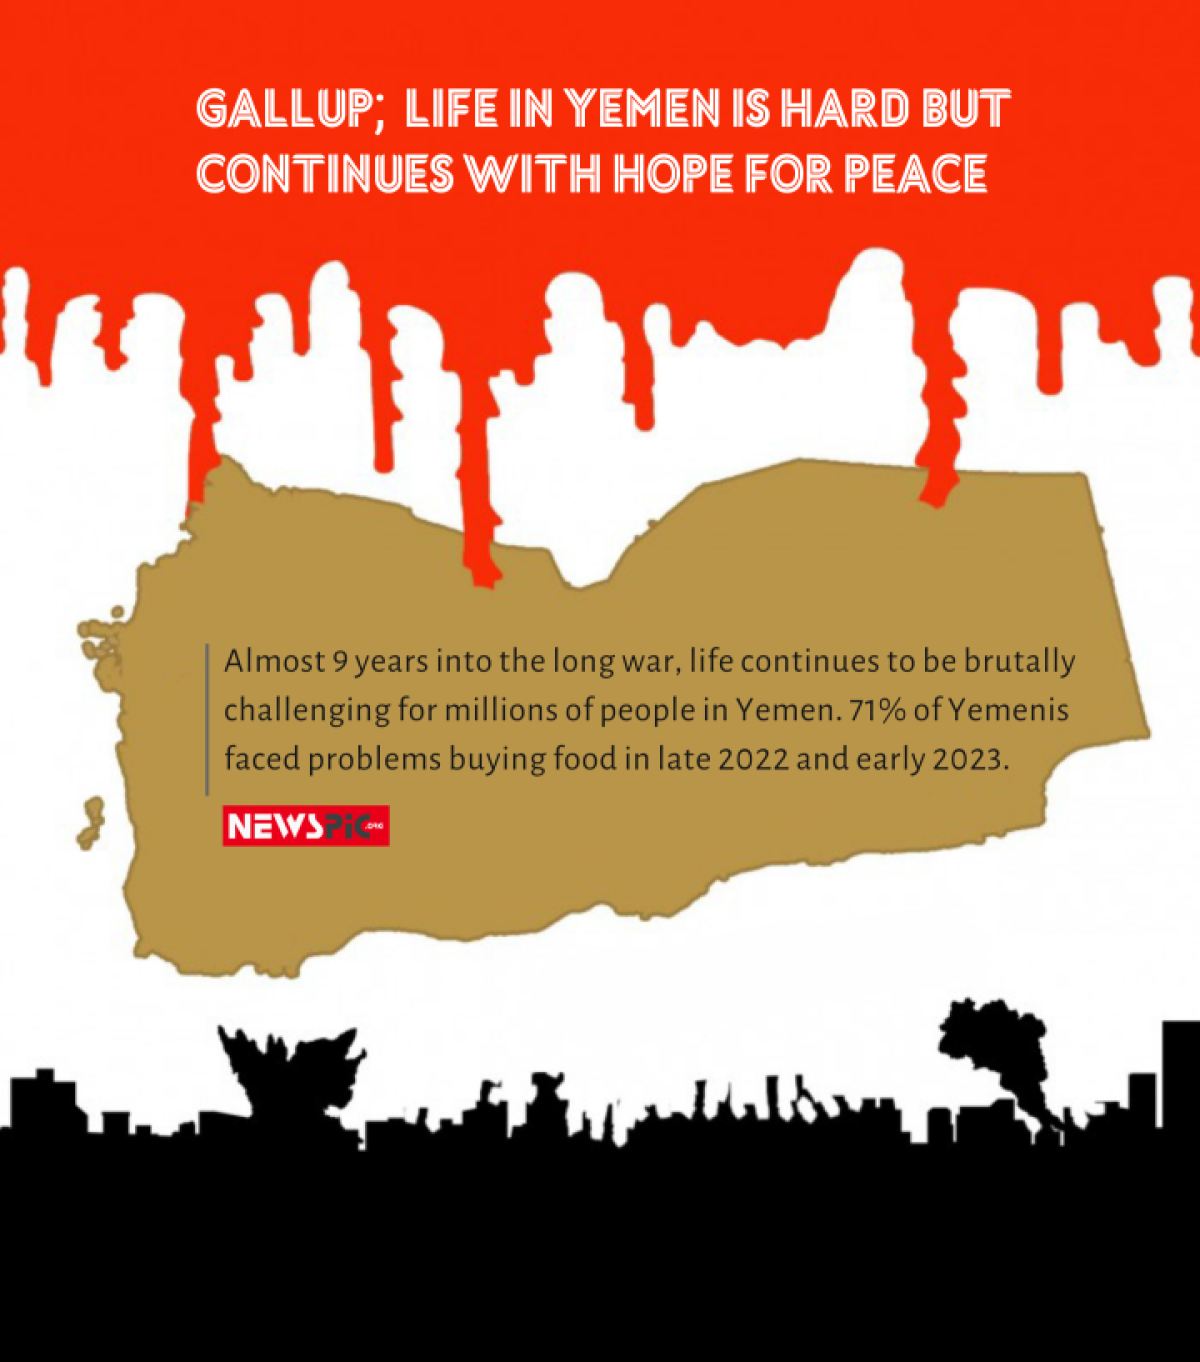 Gallup Life in Yemen hard but hopes for peace on